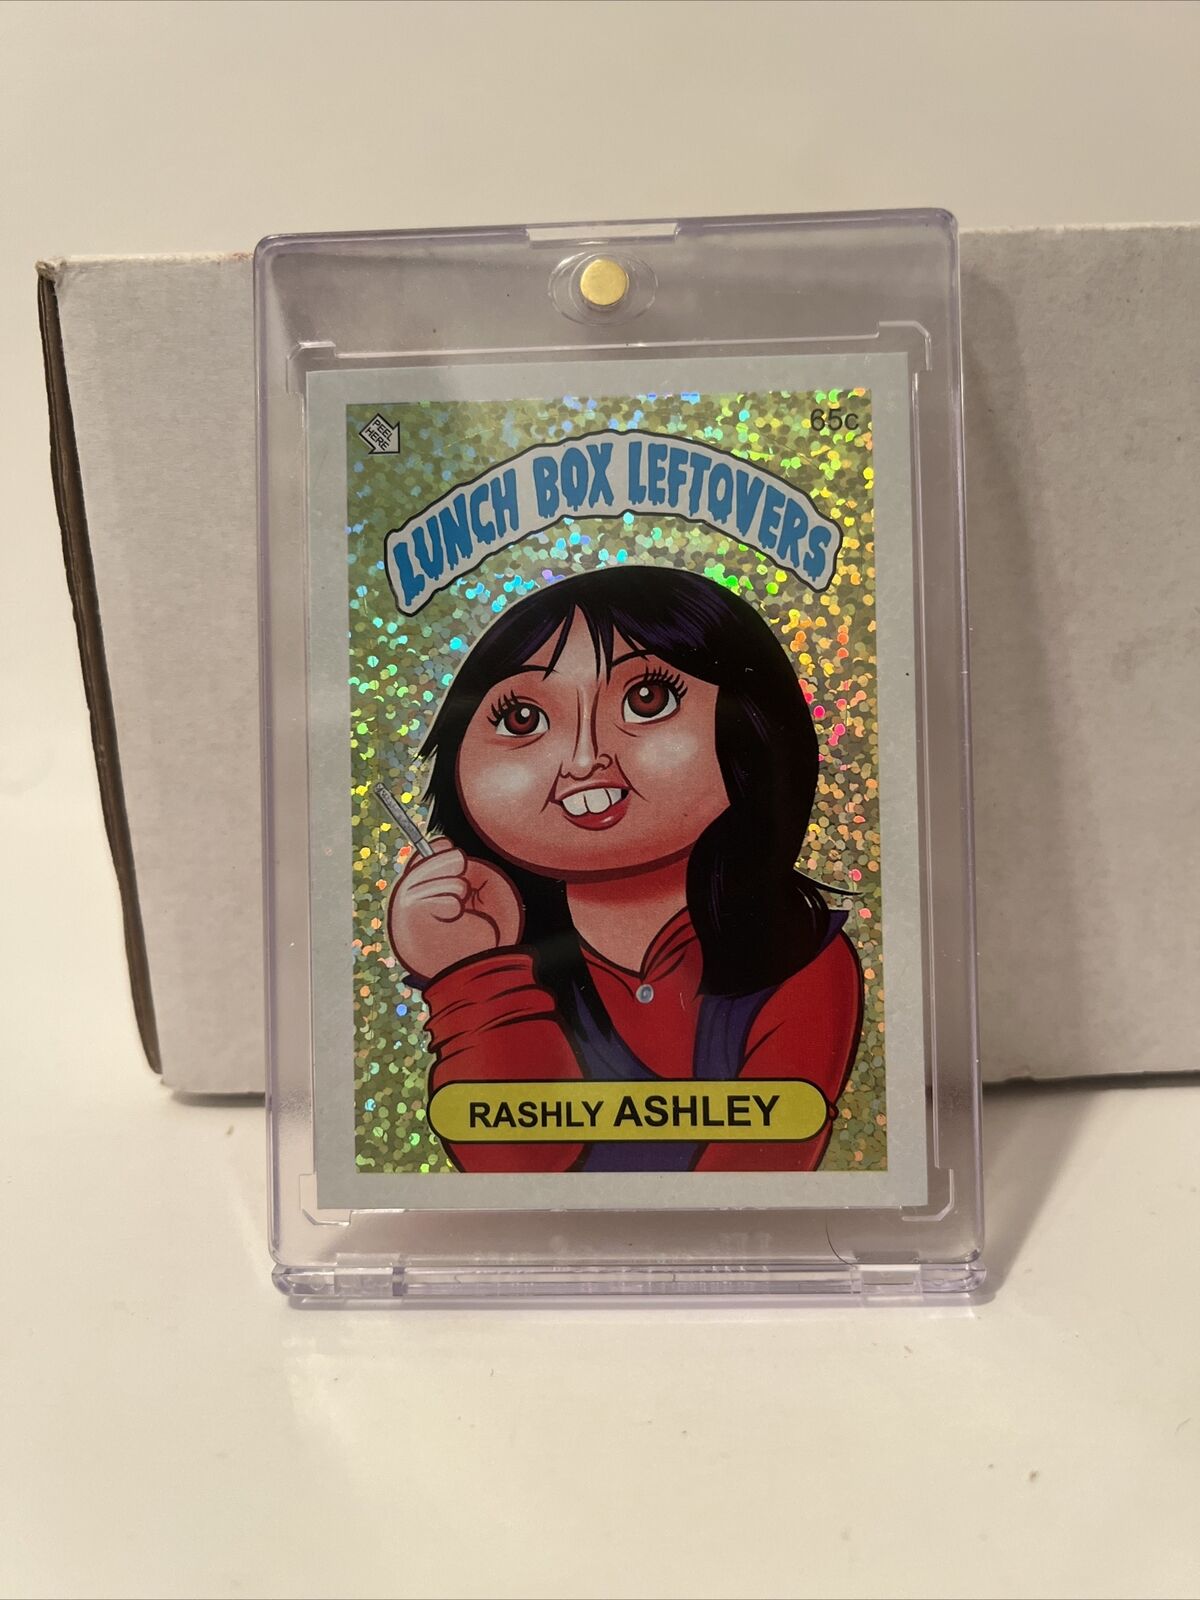 SSFC Lunch Box Leftovers Series 4 - Rashly Ashley 65C Foil Parallel Rare Chase